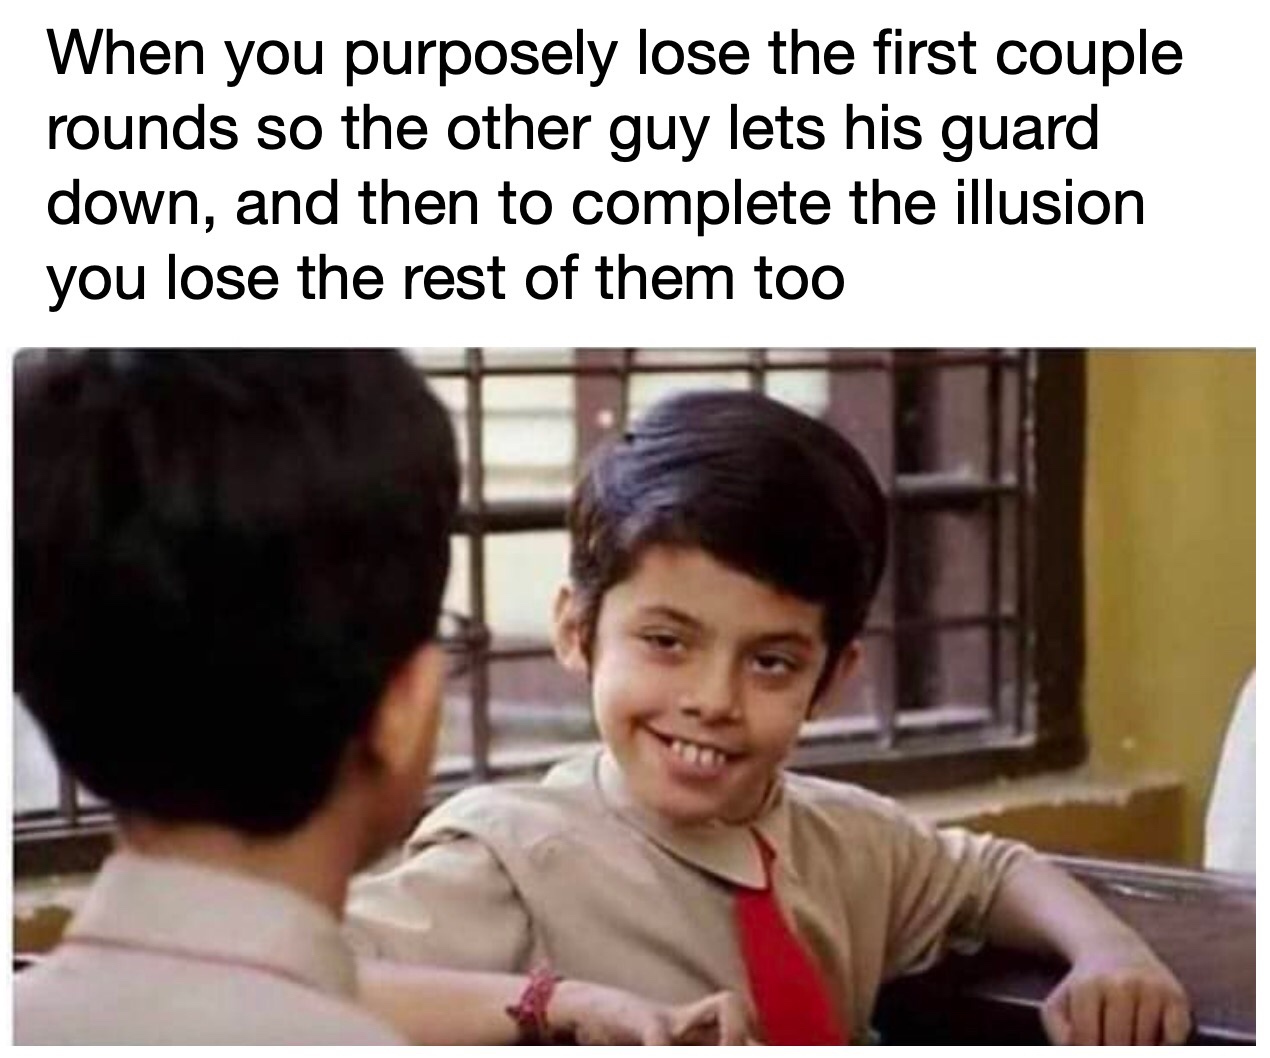 memes 2019 about school - When you purposely lose the first couple rounds so the other guy lets his guard down, and then to complete the illusion you lose the rest of them too